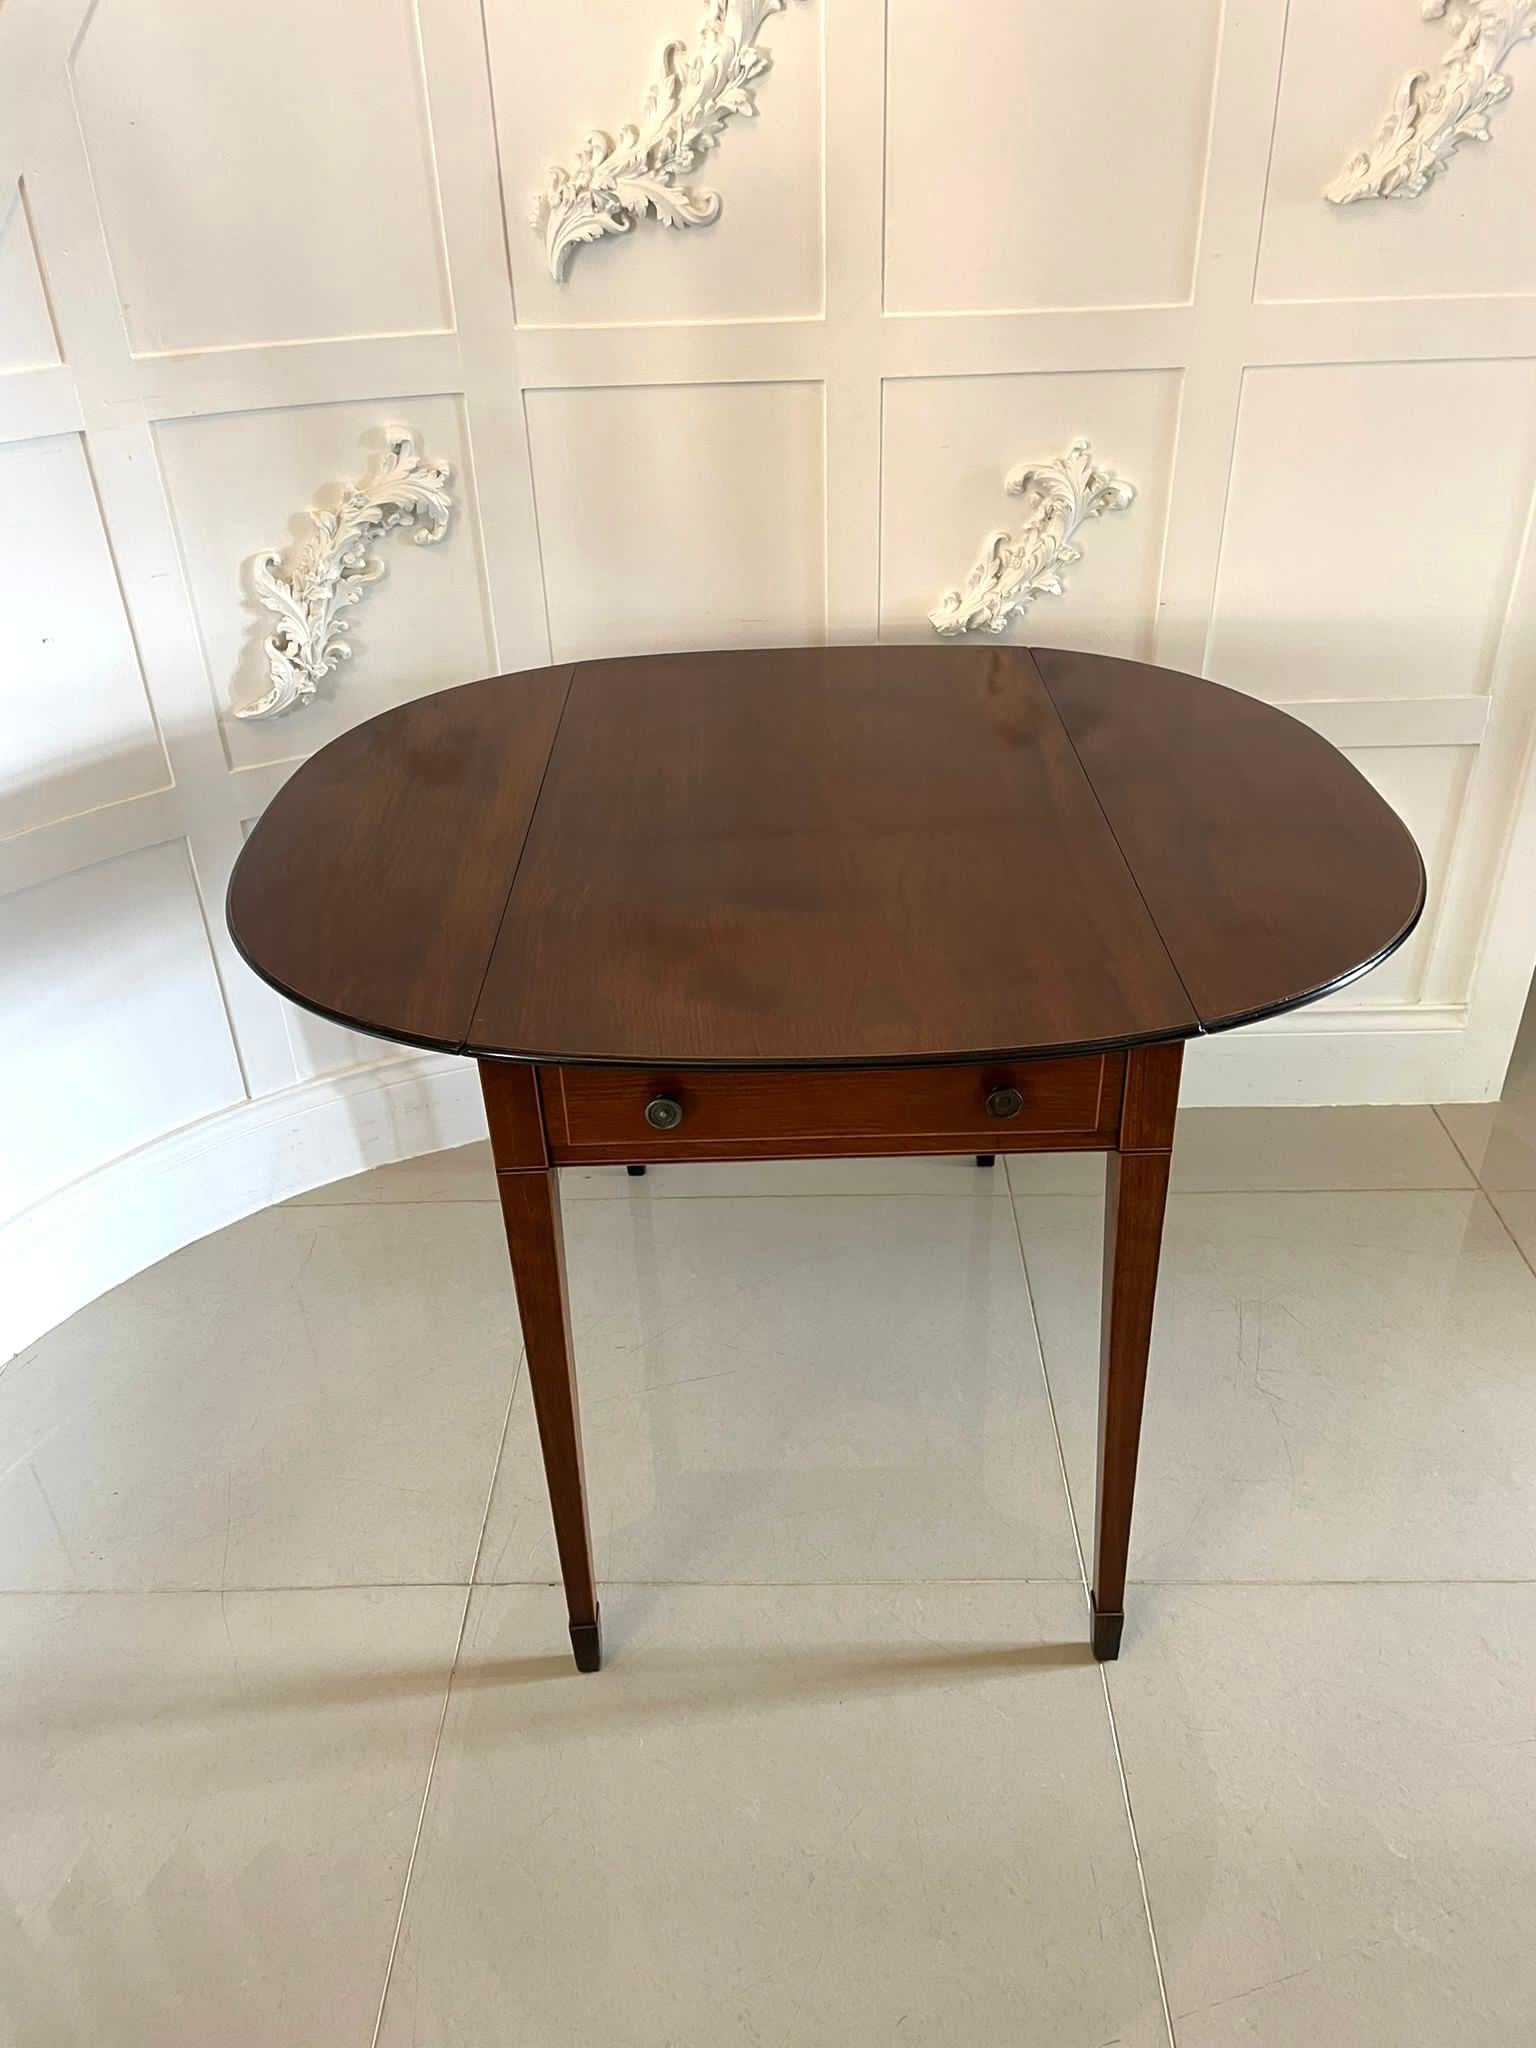 Fine Quality Antique Inlaid Mahogany Pembroke Table In Good Condition For Sale In Suffolk, GB